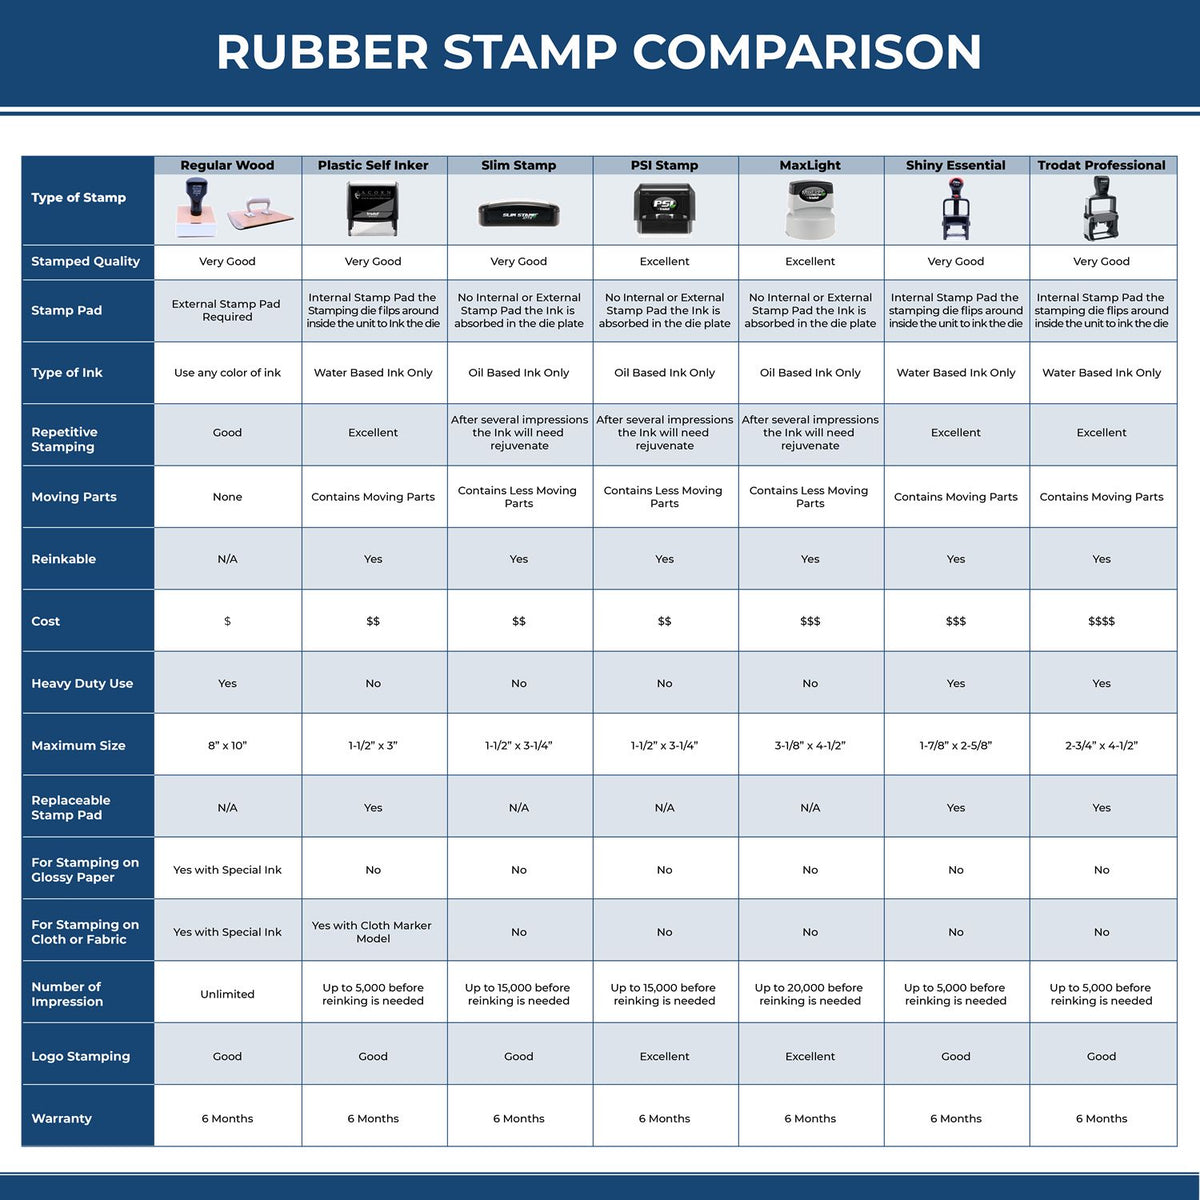 A comparison chart for the different types of mount models available for the New Mexico Professional Engineer Seal Stamp.